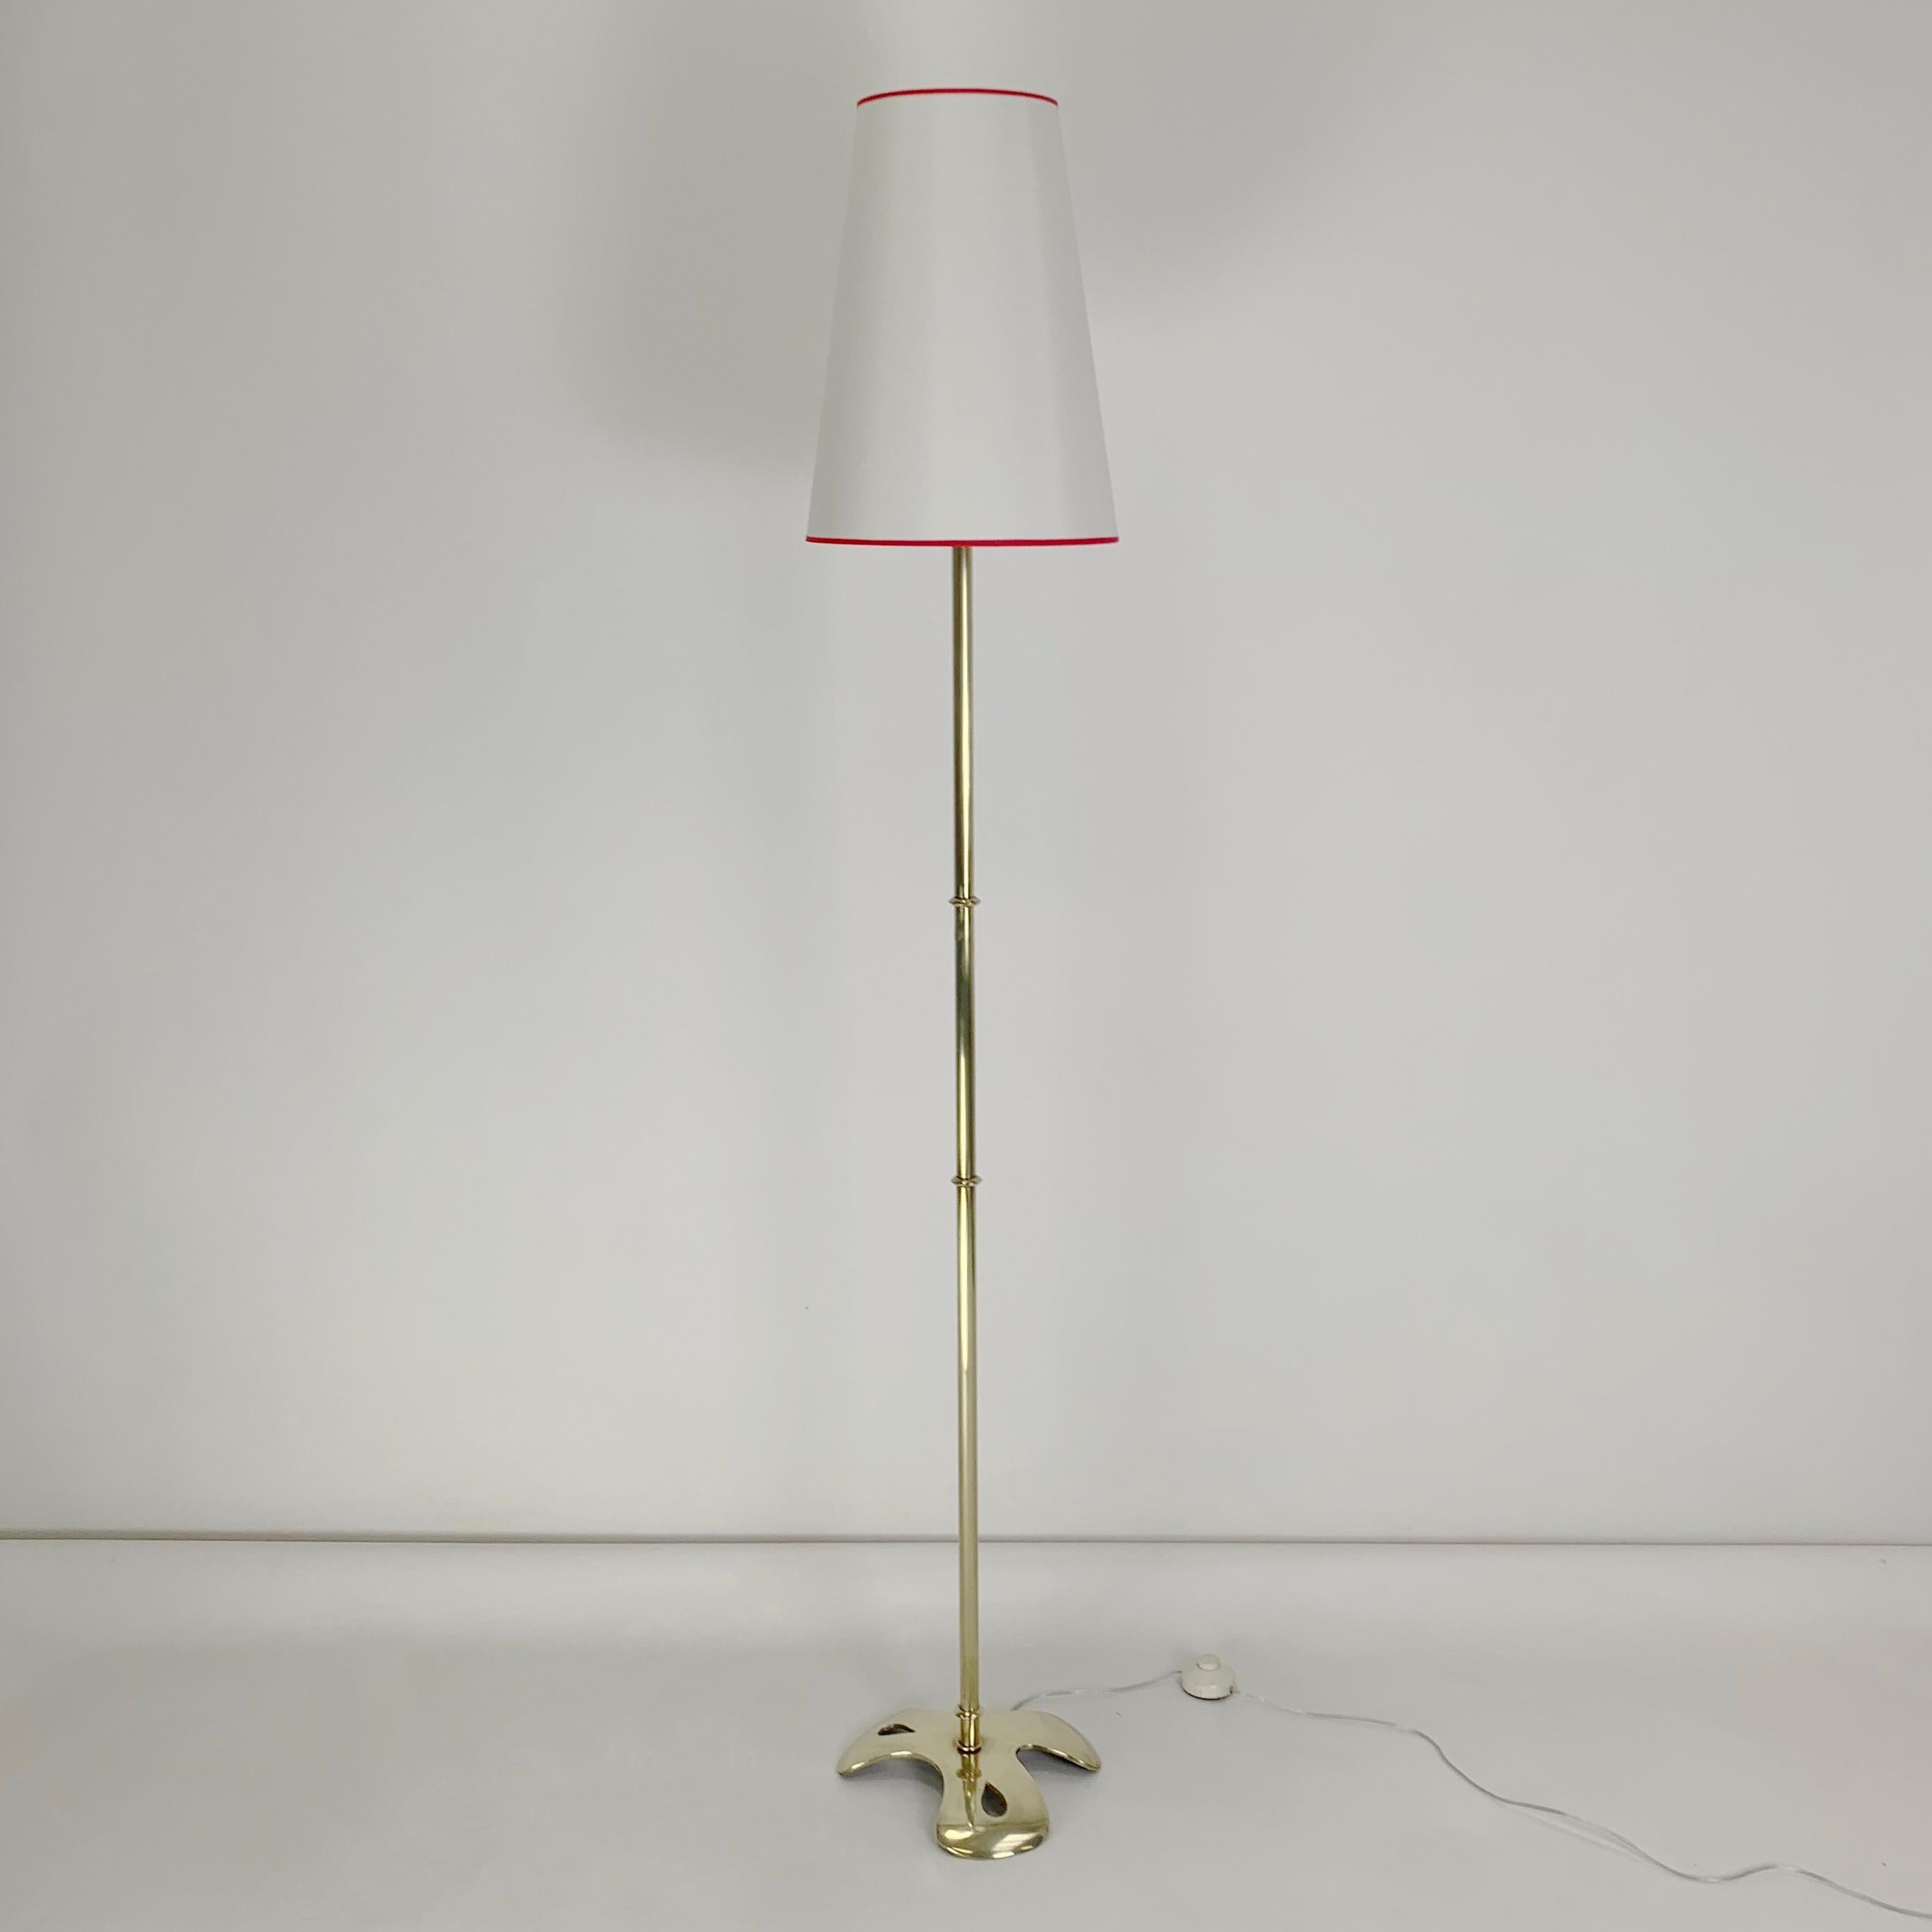 Rare model of Scarpa floor lamp, circa 1960, France.
Signed on the base Scarpa.
A very chic floor lamp with an interesting base design.
Polished brass, new fabric shade.
Rewired.
Dimensions: 170 cm total height, diameter of the base: 28 cm, diameter